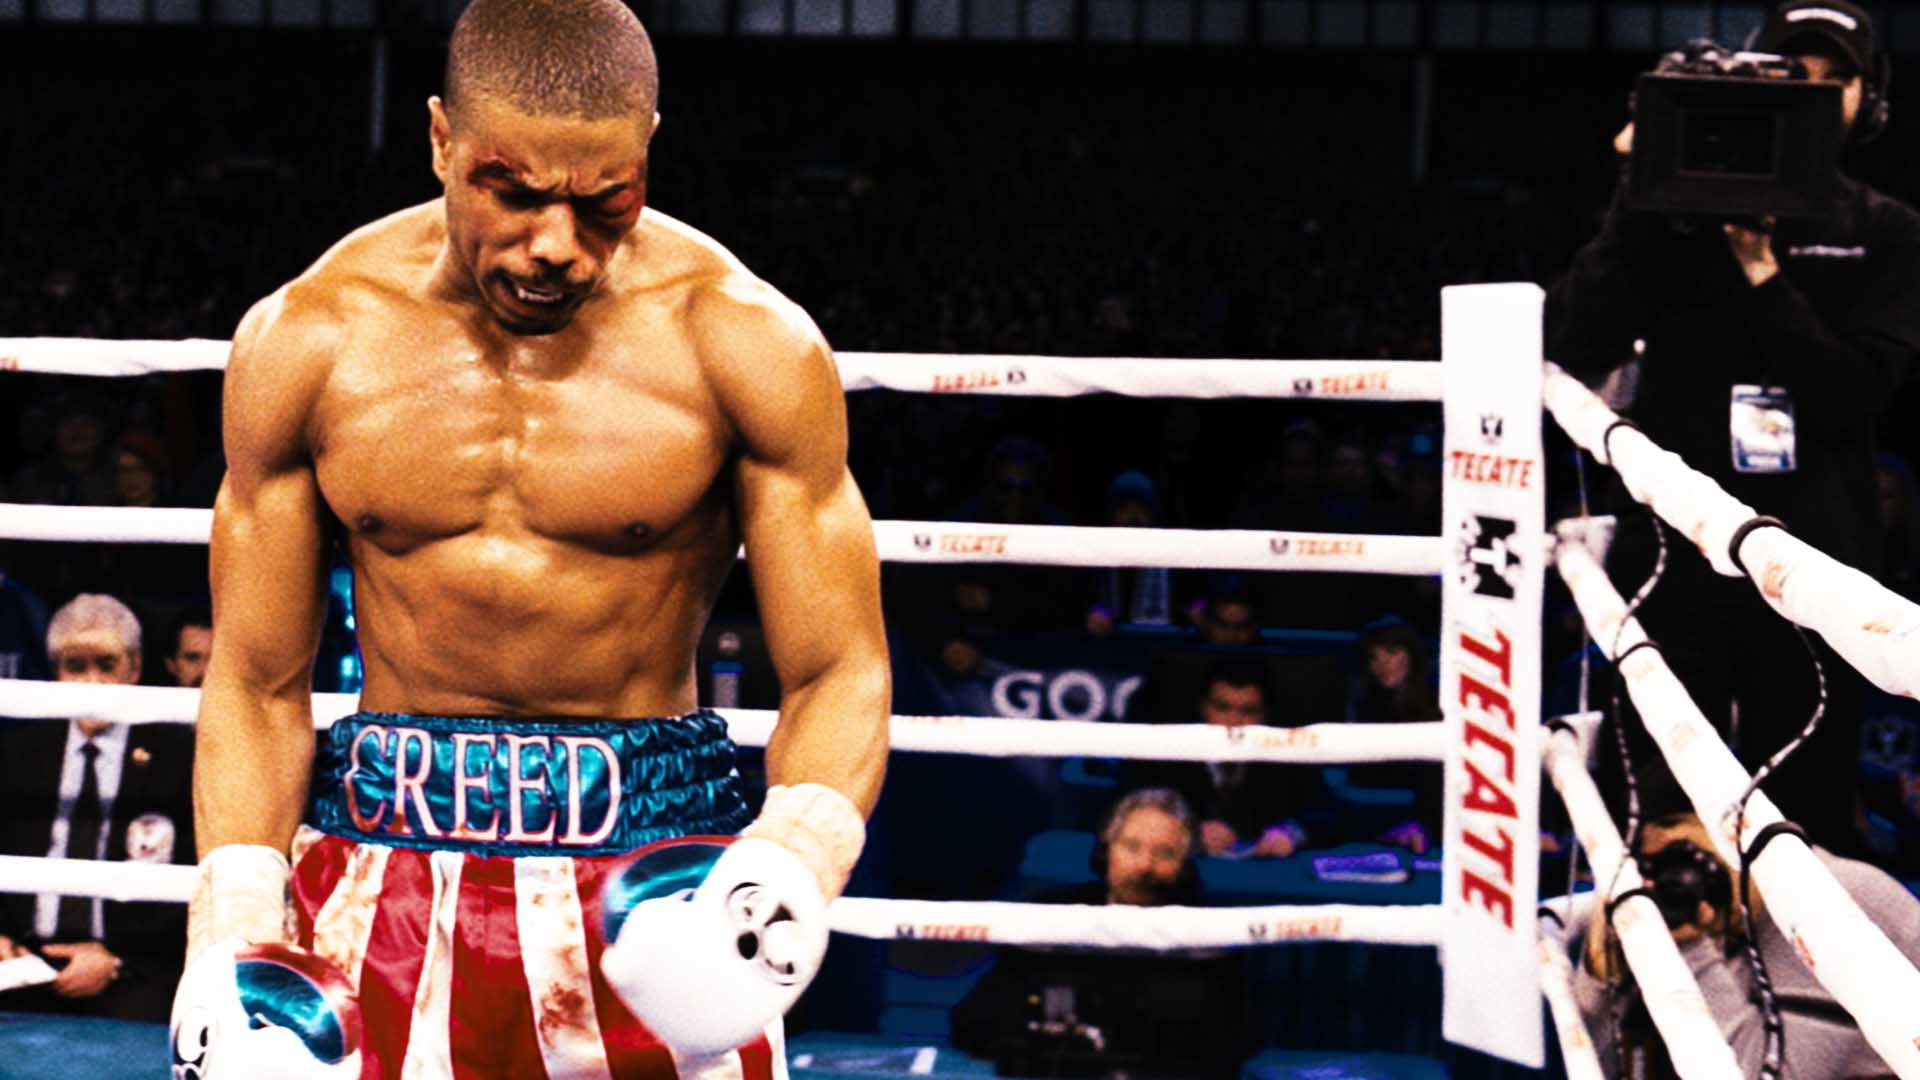 Creed' Review: Stallone Is Back Is 'Rocky' Reboot Starring Michael B